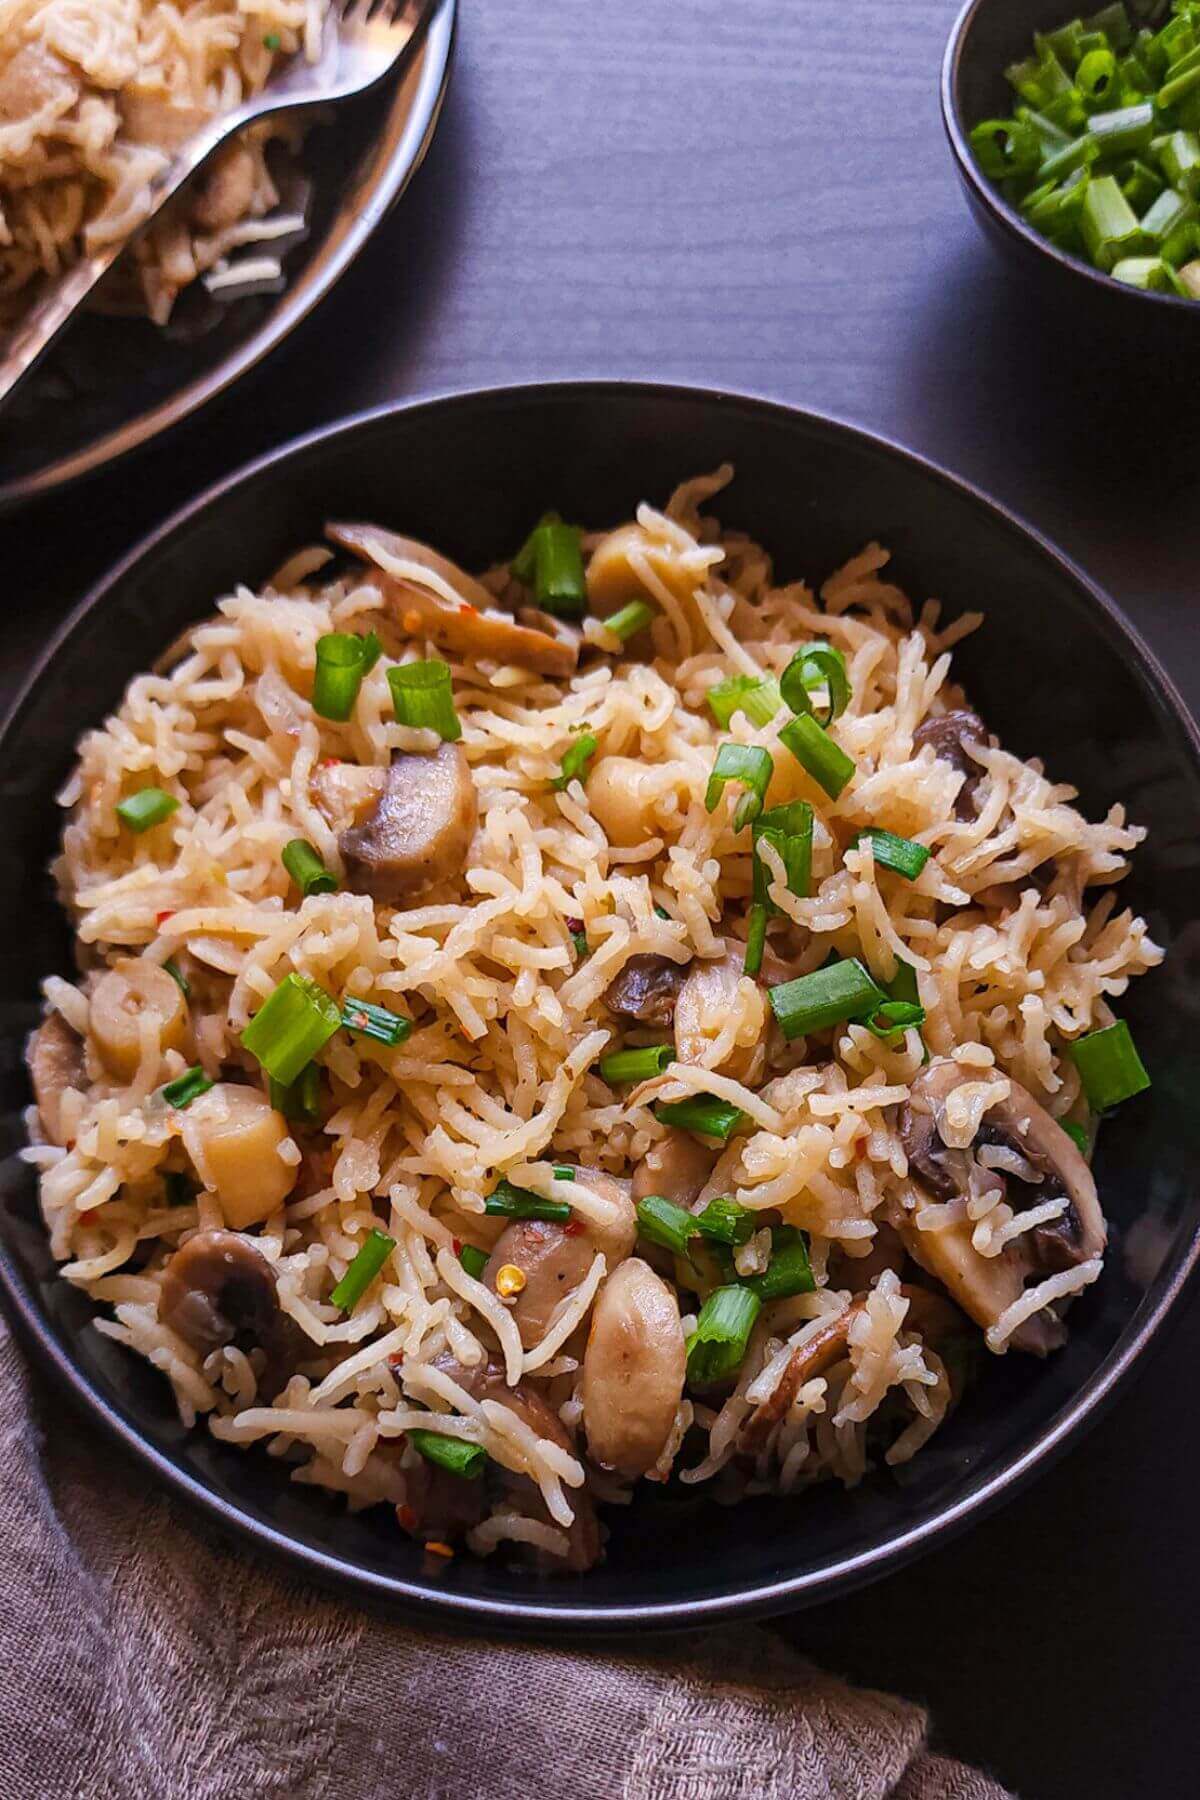 Mushroom rice garnished with chopped spring onion served on a black wok